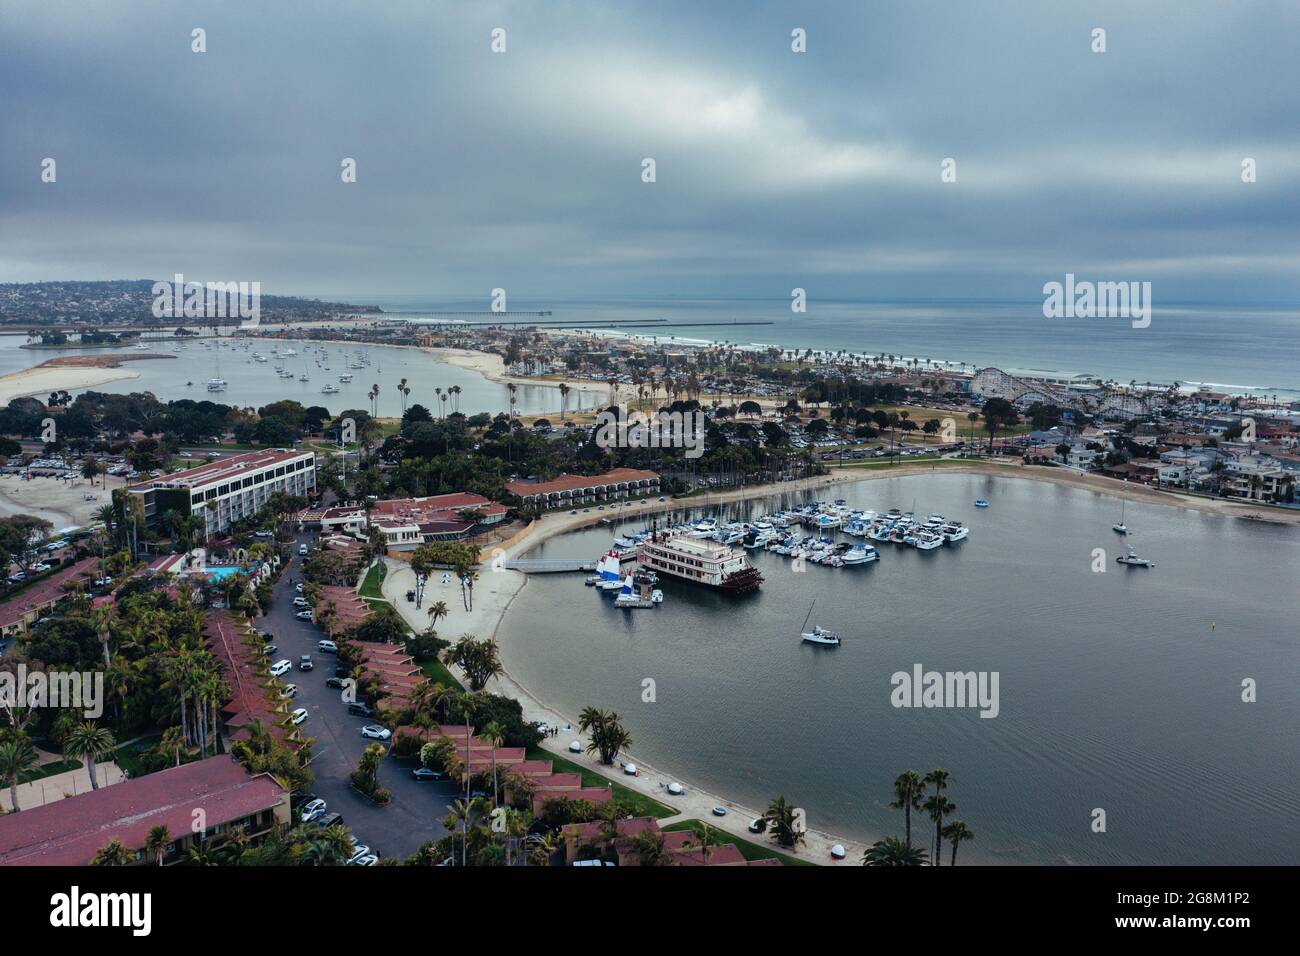 Mission Bay in San Diego, California Stock Photo